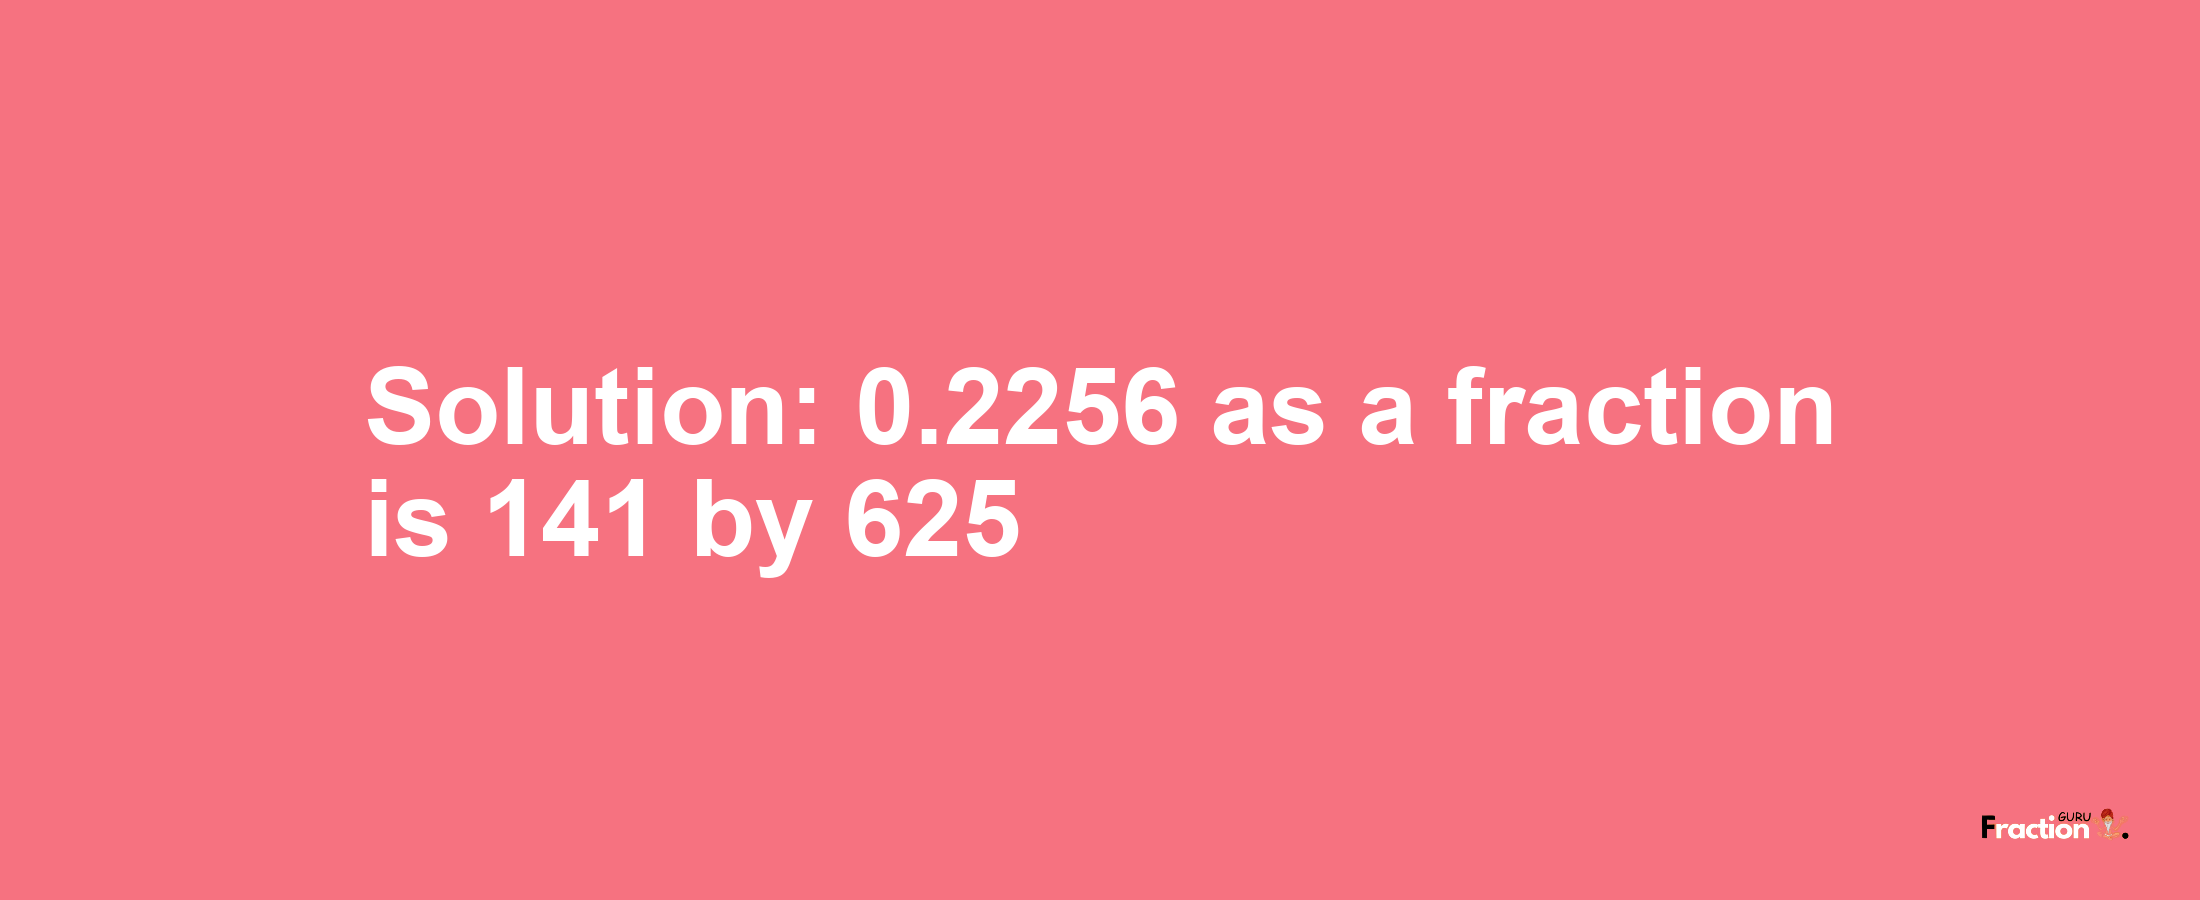 Solution:0.2256 as a fraction is 141/625